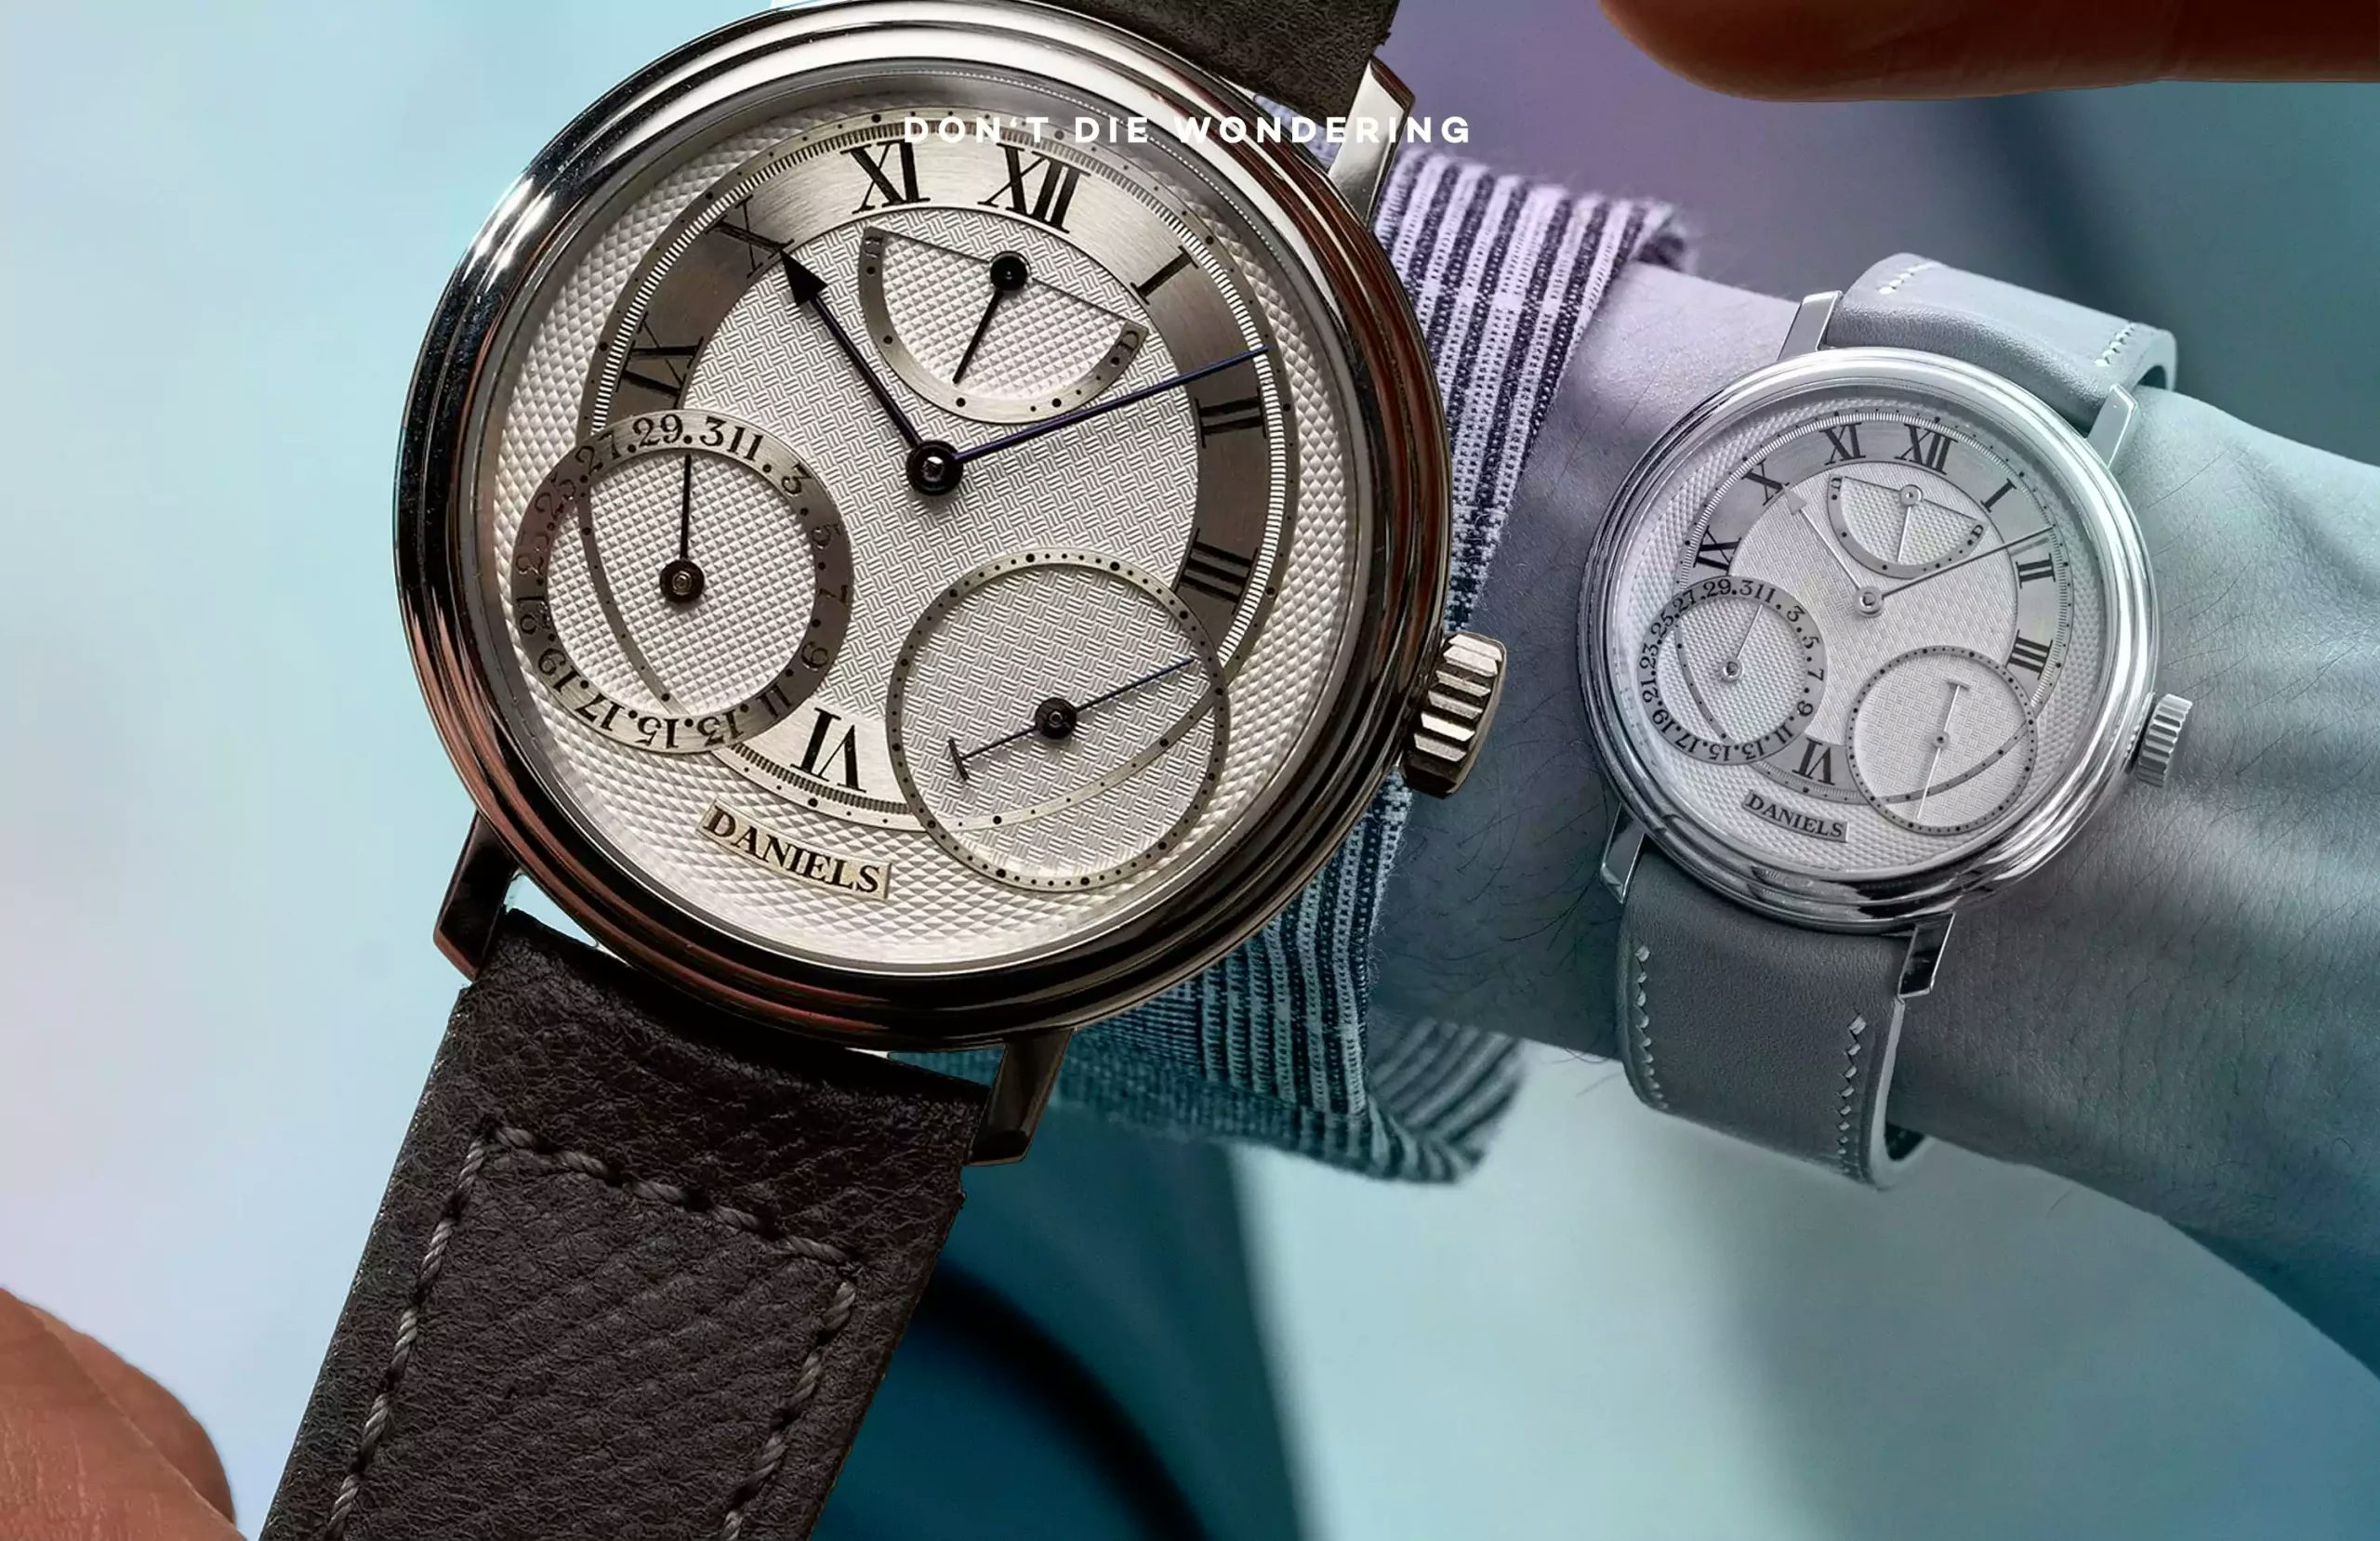 The First Platinum George Daniels Anniversary Watch Sells For $2 Million